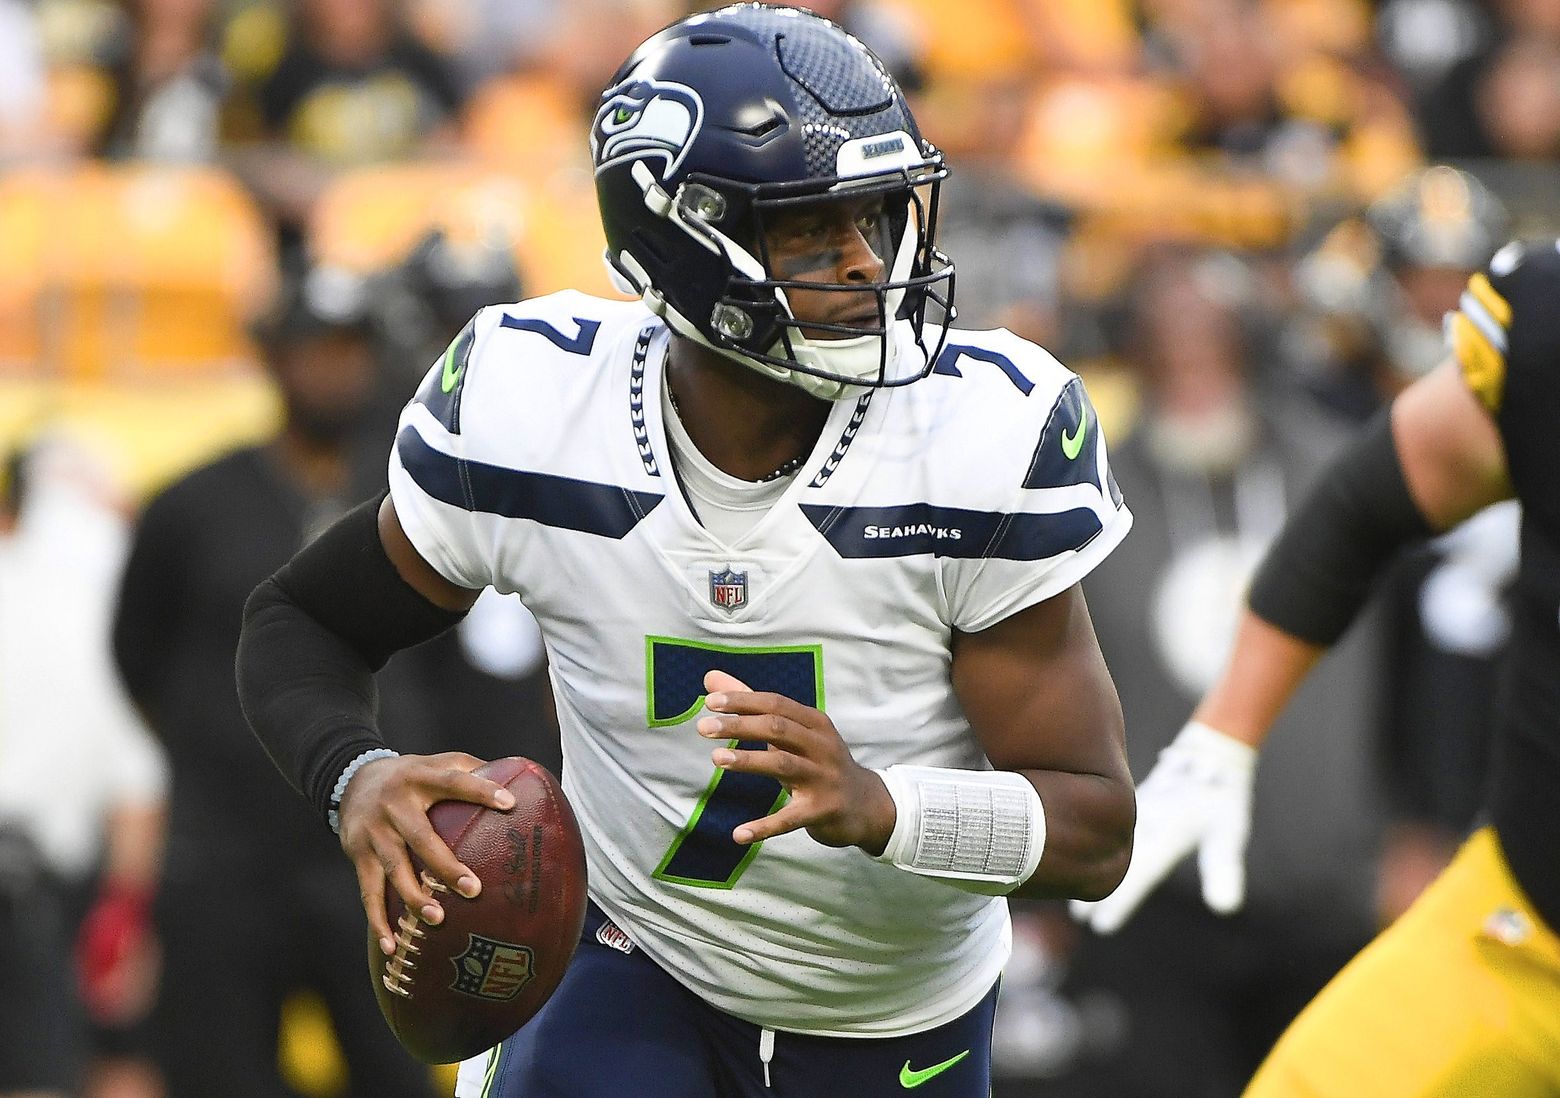 If Seahawks QB competition remains close, Geno Smith will win job | The Seattle Times